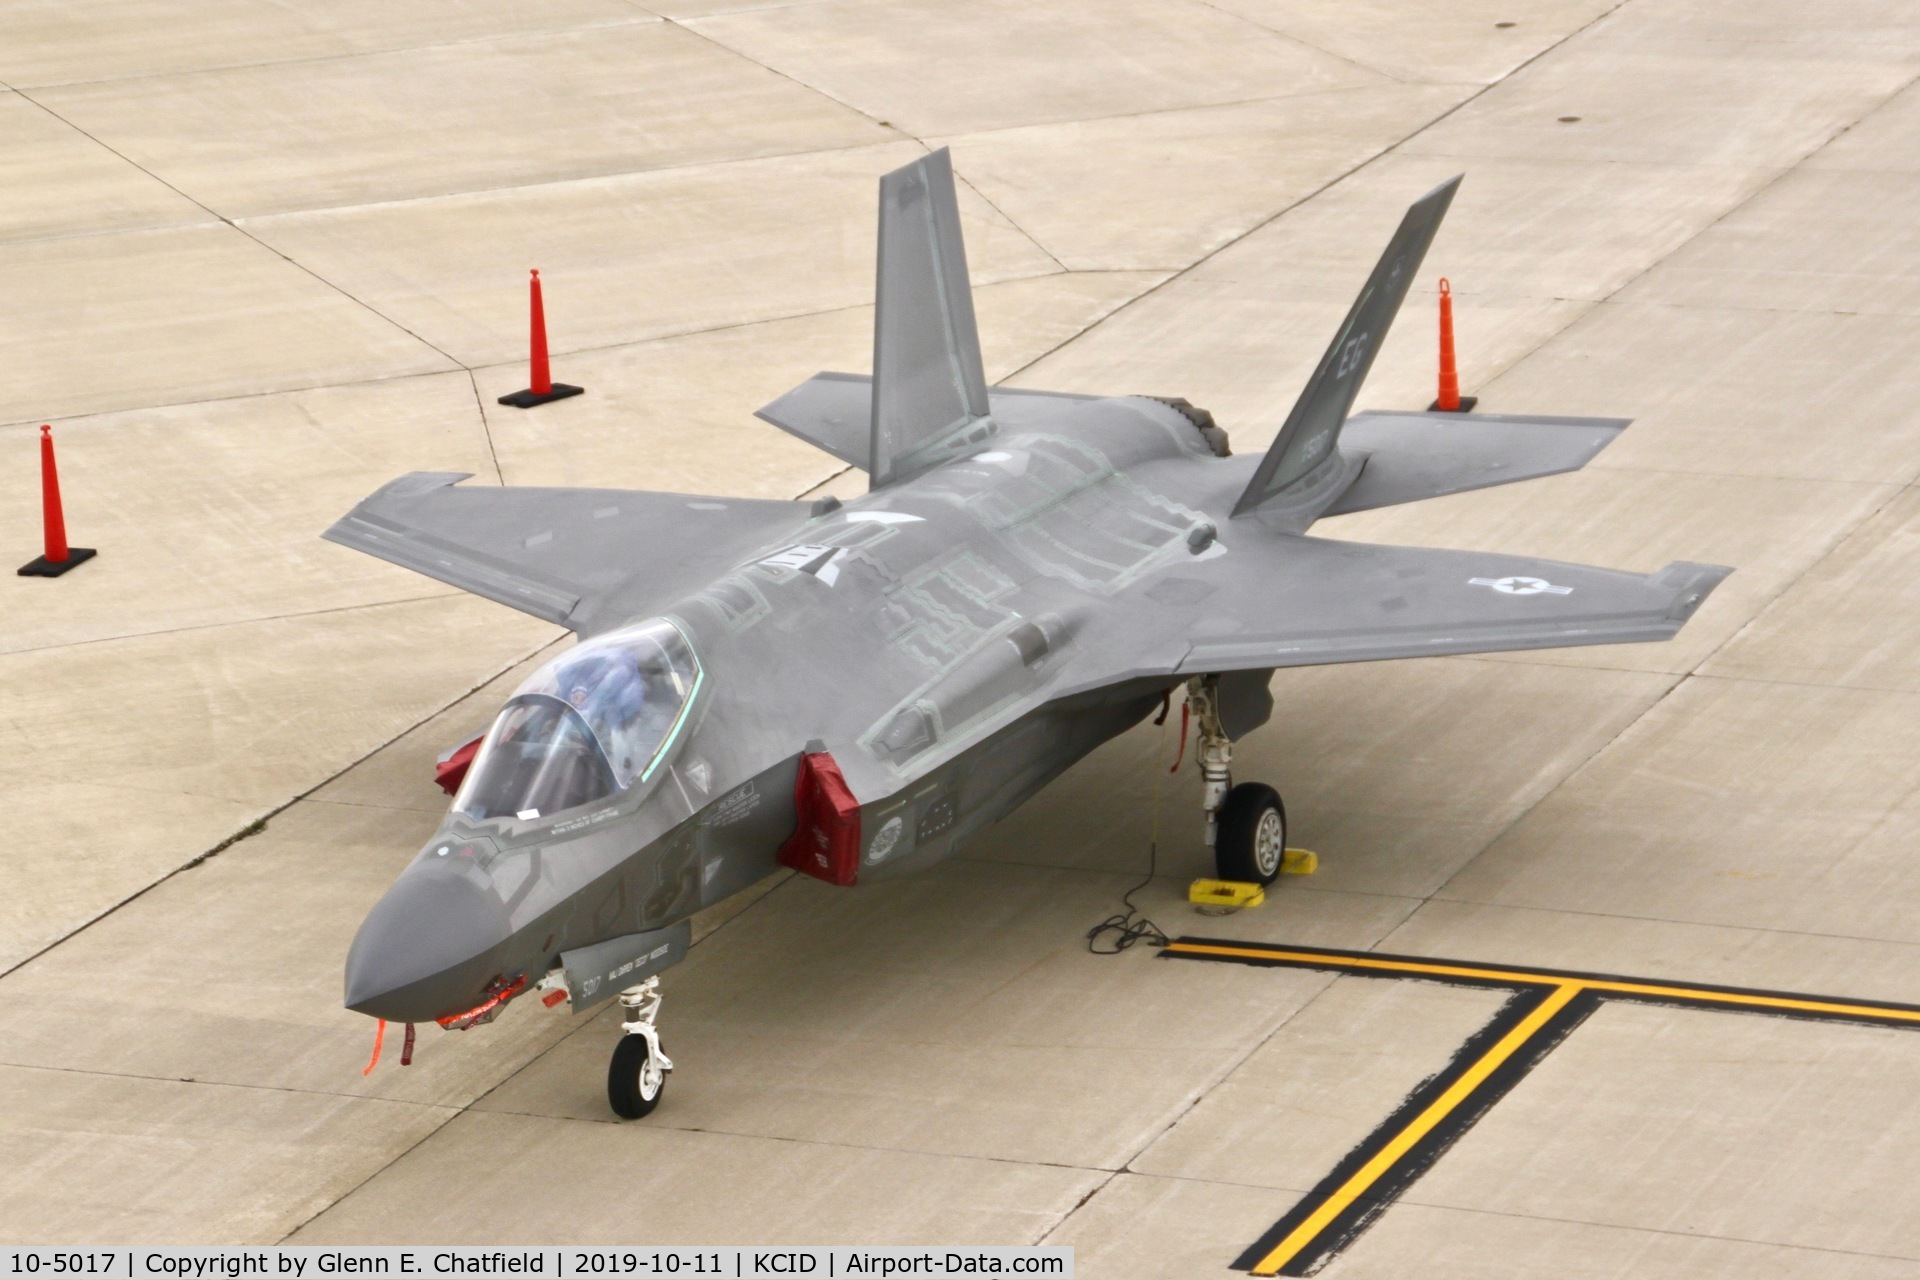 10-5017, 2013 Lockheed Martin F-35A Lightning II C/N AF-29, Photographed from the control tower